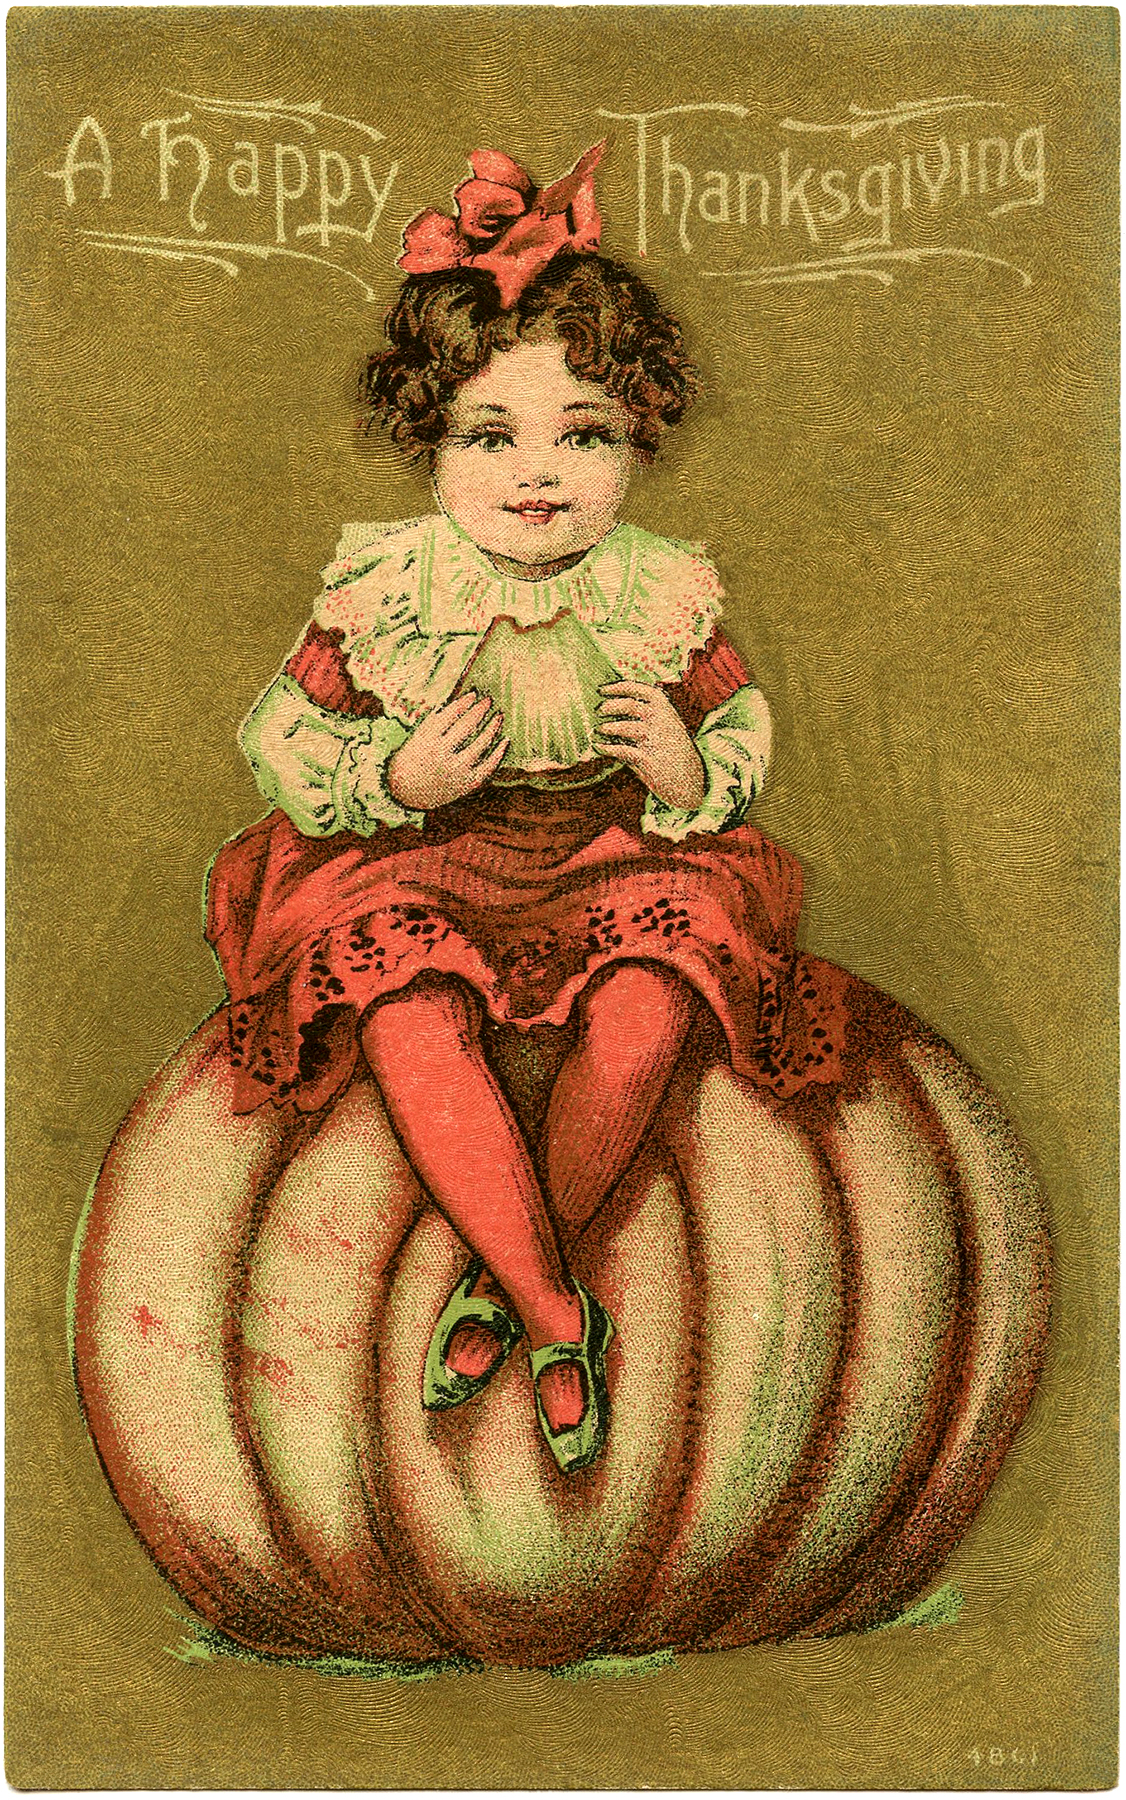 Cute Vintage Thanksgiving Card! - The Graphics Fairy